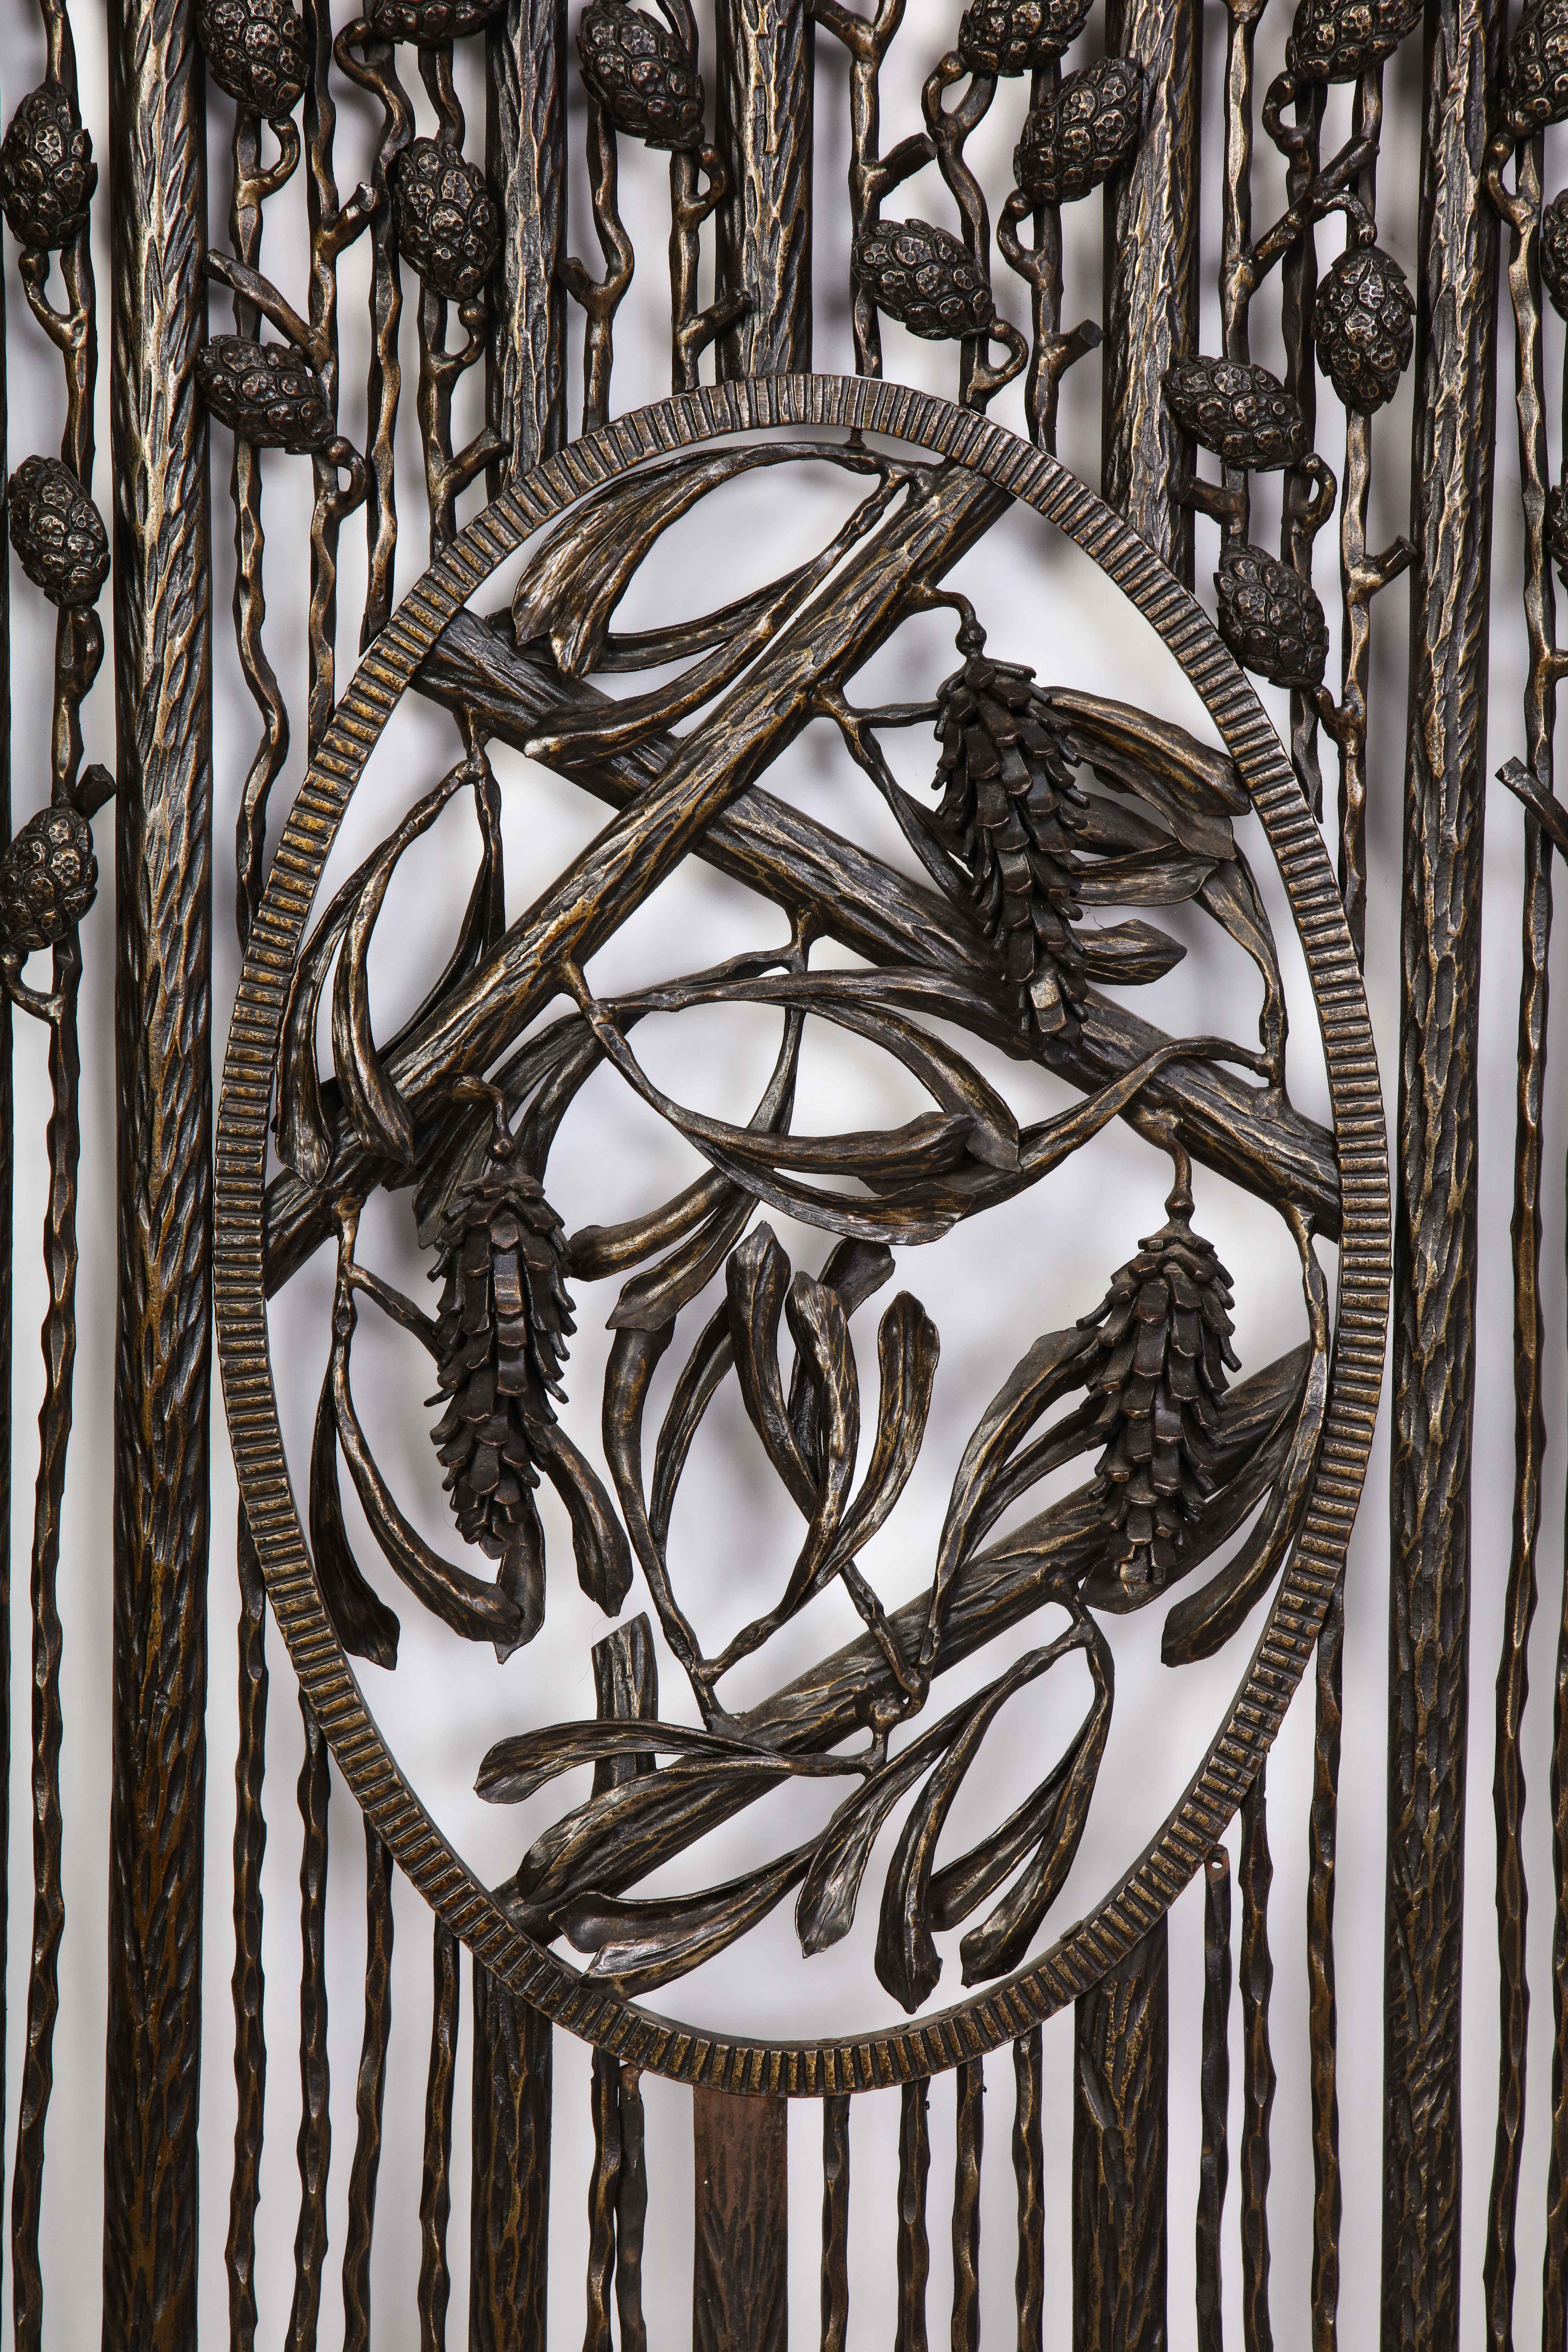 20th Century Wrought-Iron Grate, in the Style of Edgar Brandt, Modern